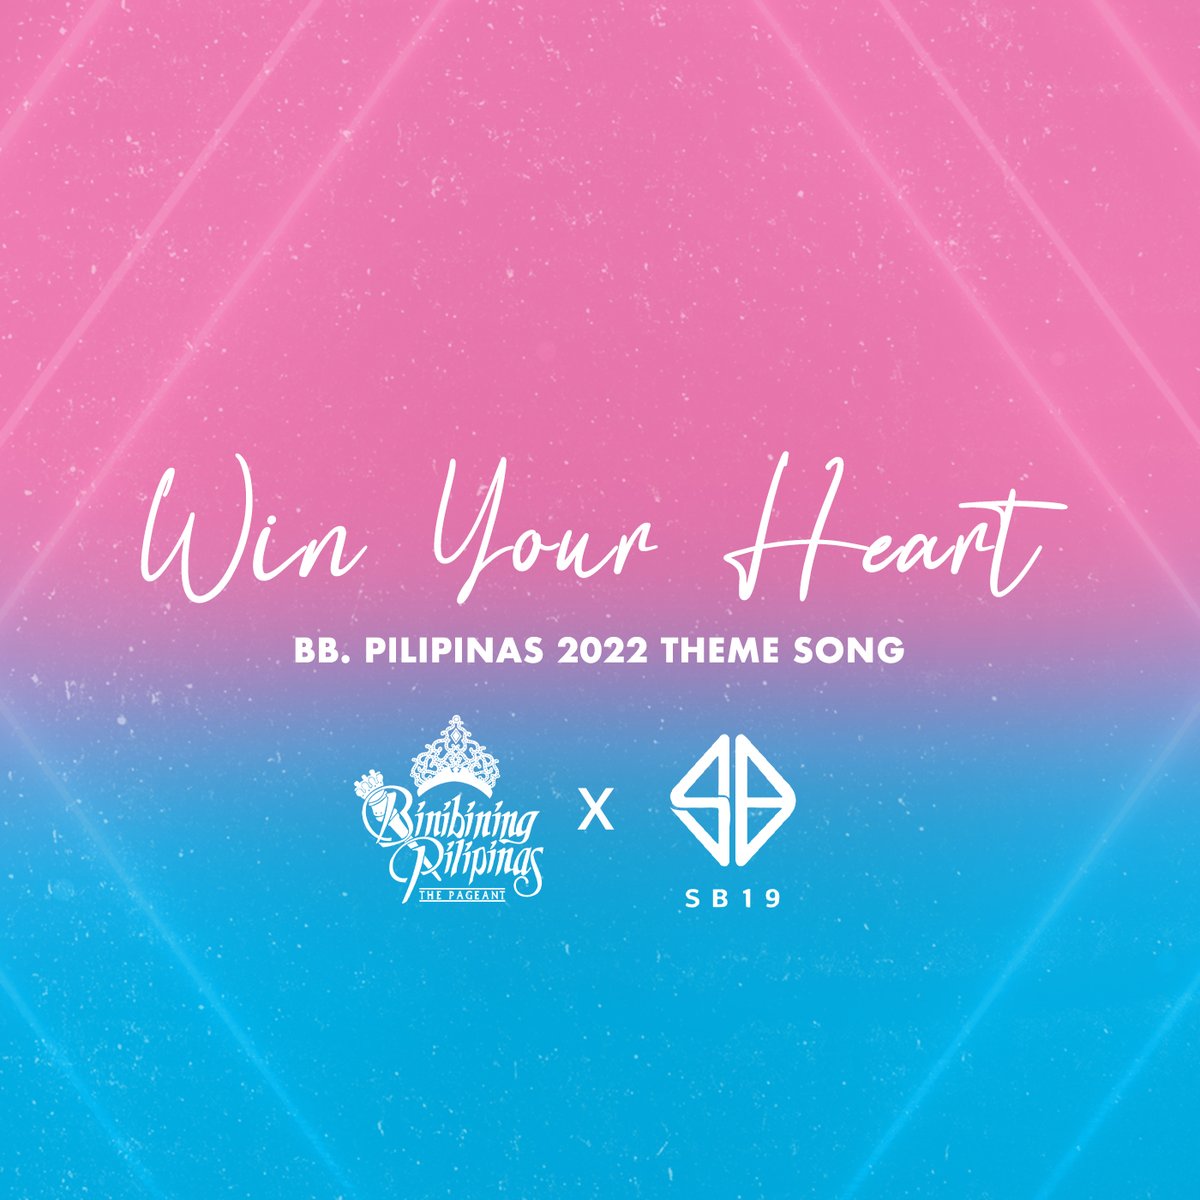 📣 SB19 at BB Pilipinas 2022 Here is your first look at the Binibining Pilipinas Theme Song Track Artwork: 'WIN YOUR HEART' 💙 Track and MV Release 📅 July 15 (FRI), 7 PM PHT @RealBbPilipinas #SB19atBBP2022 #BbPilipinas2022 #QueensxKings